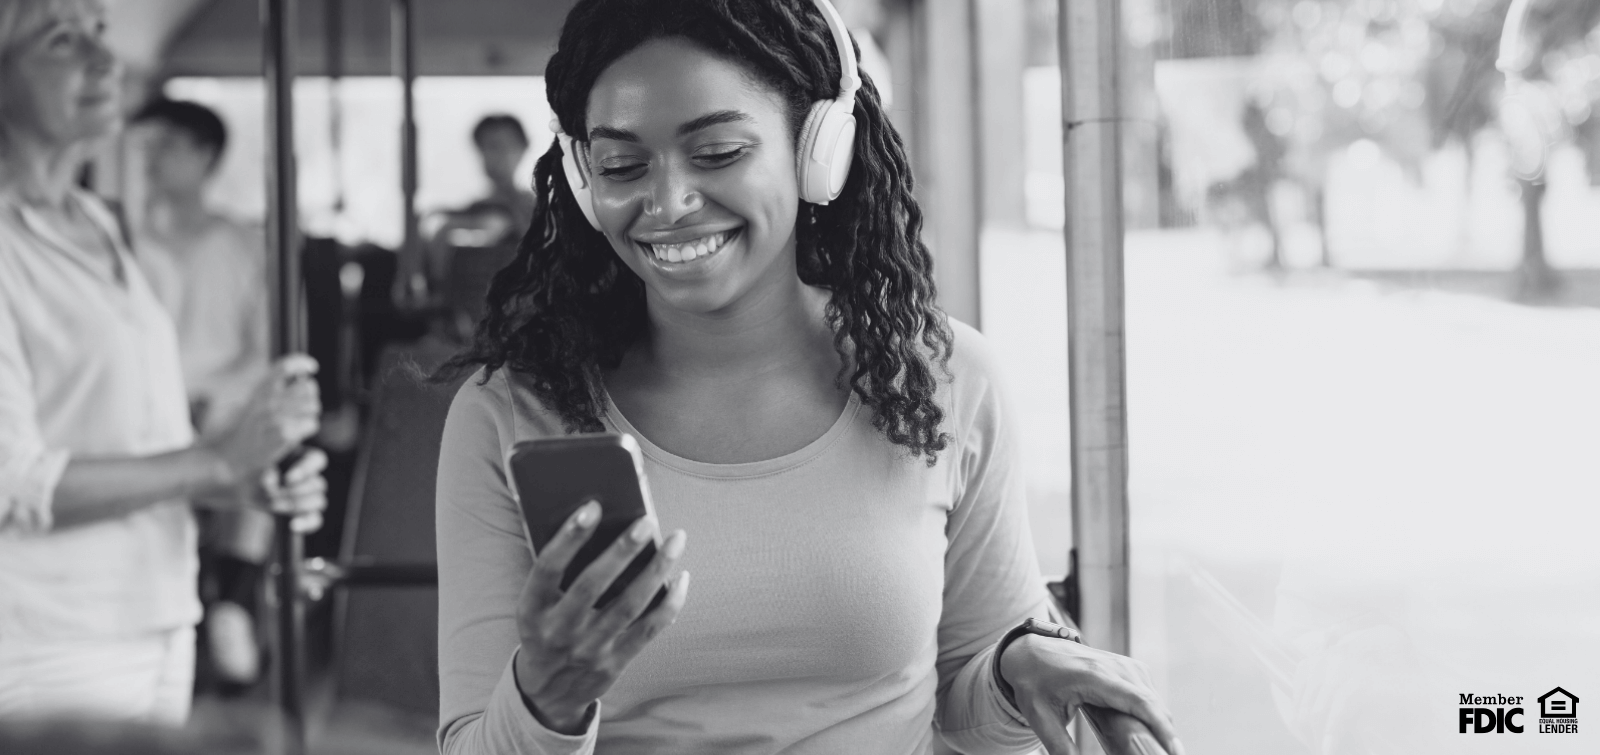 a young woman enjoys mobile banking on the bus